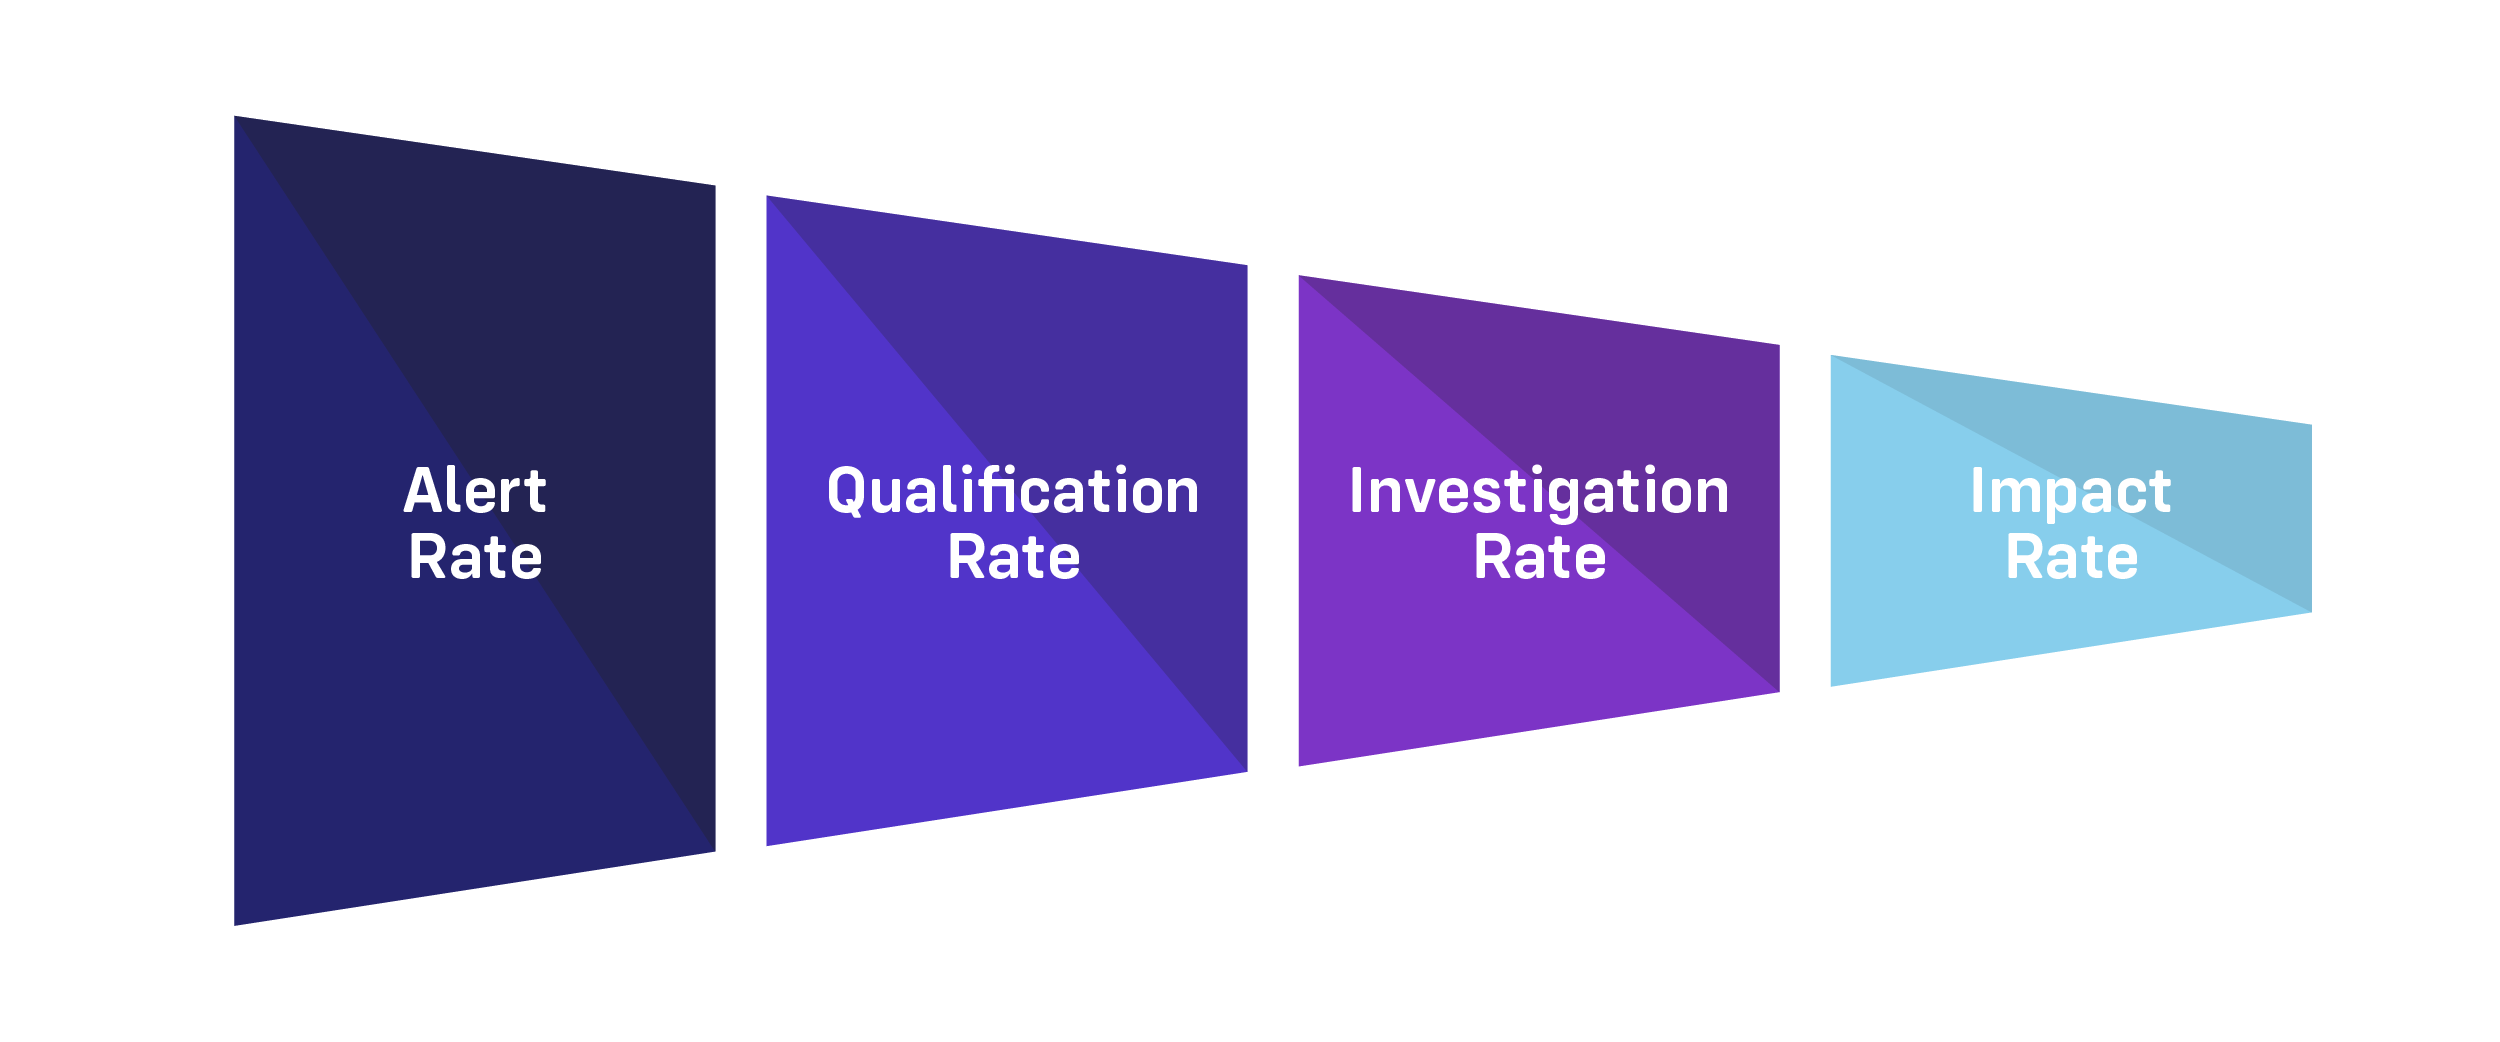 Flow chart from alert rate, qualification rate, investigation rate, and impact rate.